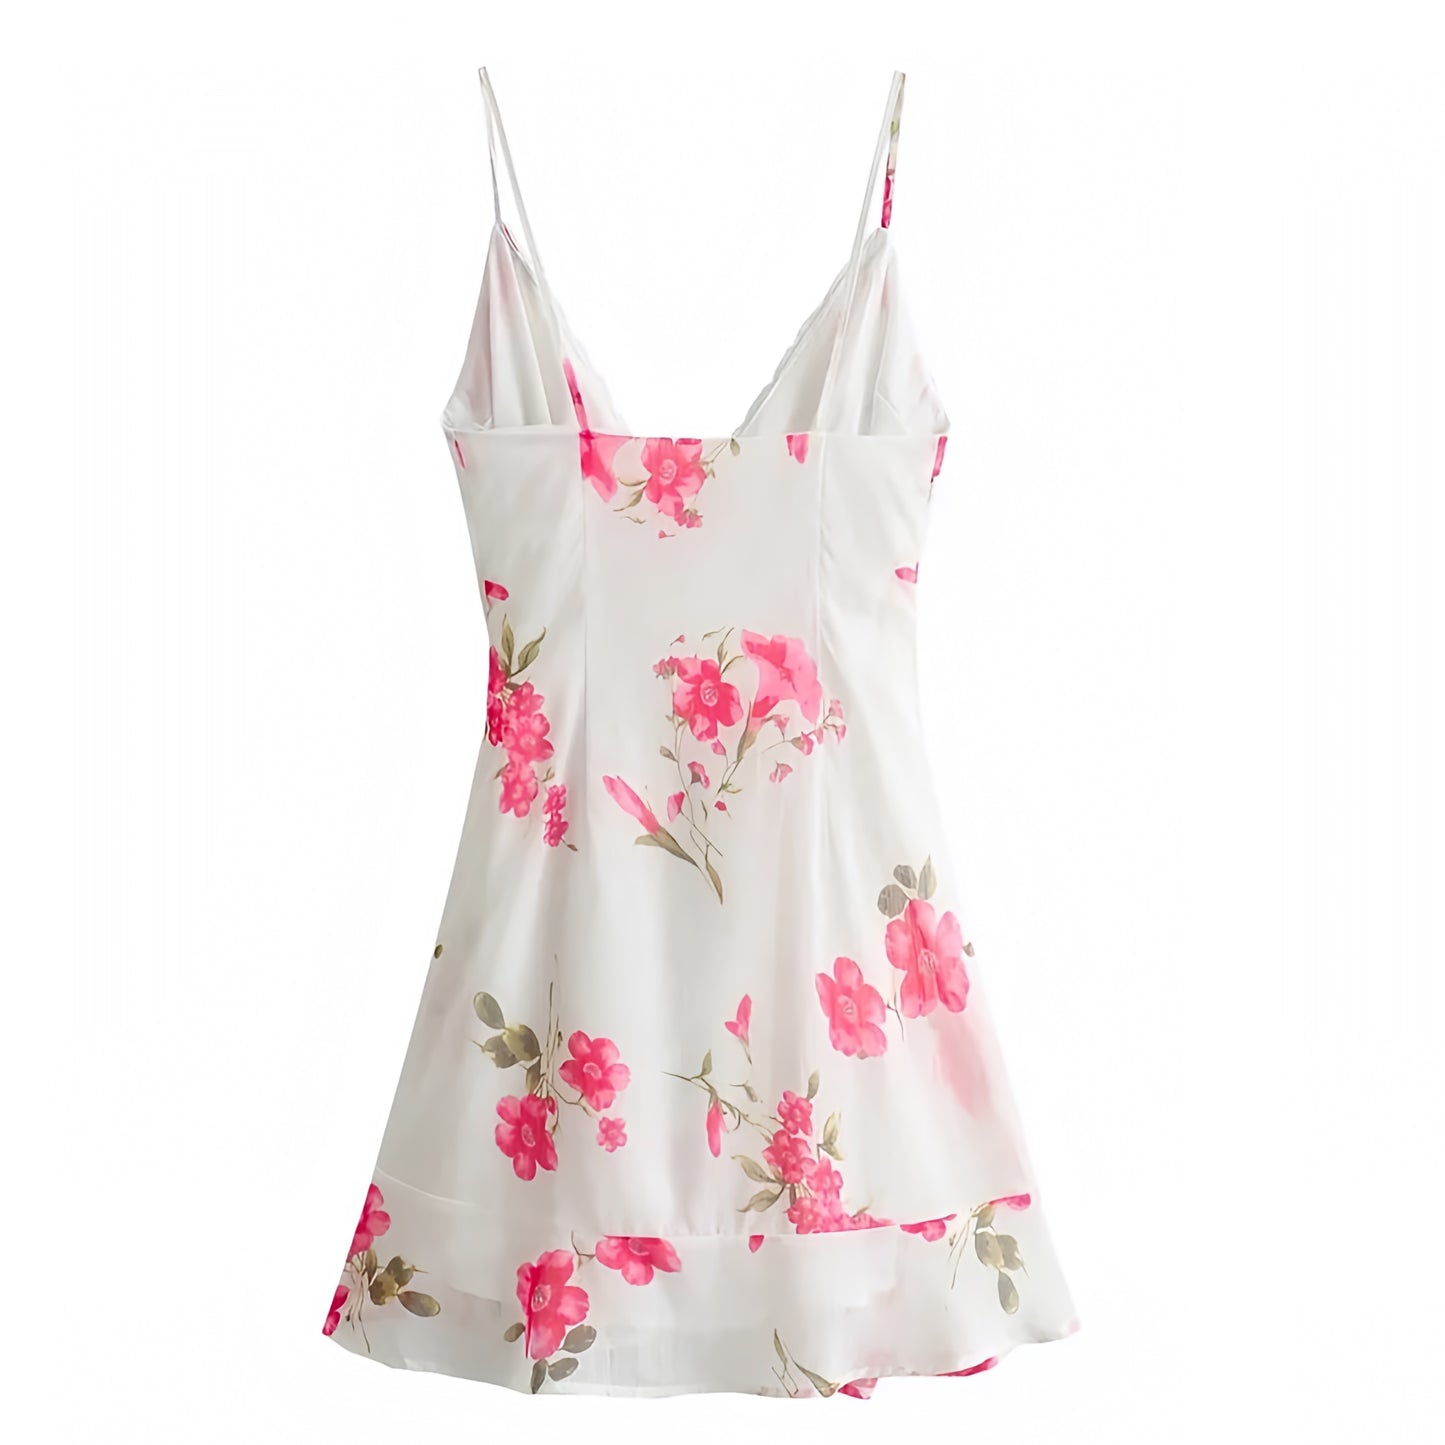 floral-print-pink-white-flower-patterned-slim-fit-bodycon-lace-trim-ruffled-cinched-waist-ruched-spaghetti-strap-v-neck-sleeveless-backless-open-back-tiered-linen-flowy-short-mini-dress-evening-gown-women-ladies-teens-tweens-chic-trendy-spring-2024-summer-elegant-semi-formal-casual-classy-classic-feminine-garden-party-wedding-guest-prom-homecoming-hoco-dance-graduation-preppy-style-tropical-vacation-beach-wear-sundress-revolve-zara-princess-polly-ohpolly-loveshackfancy-altard-state-dupe